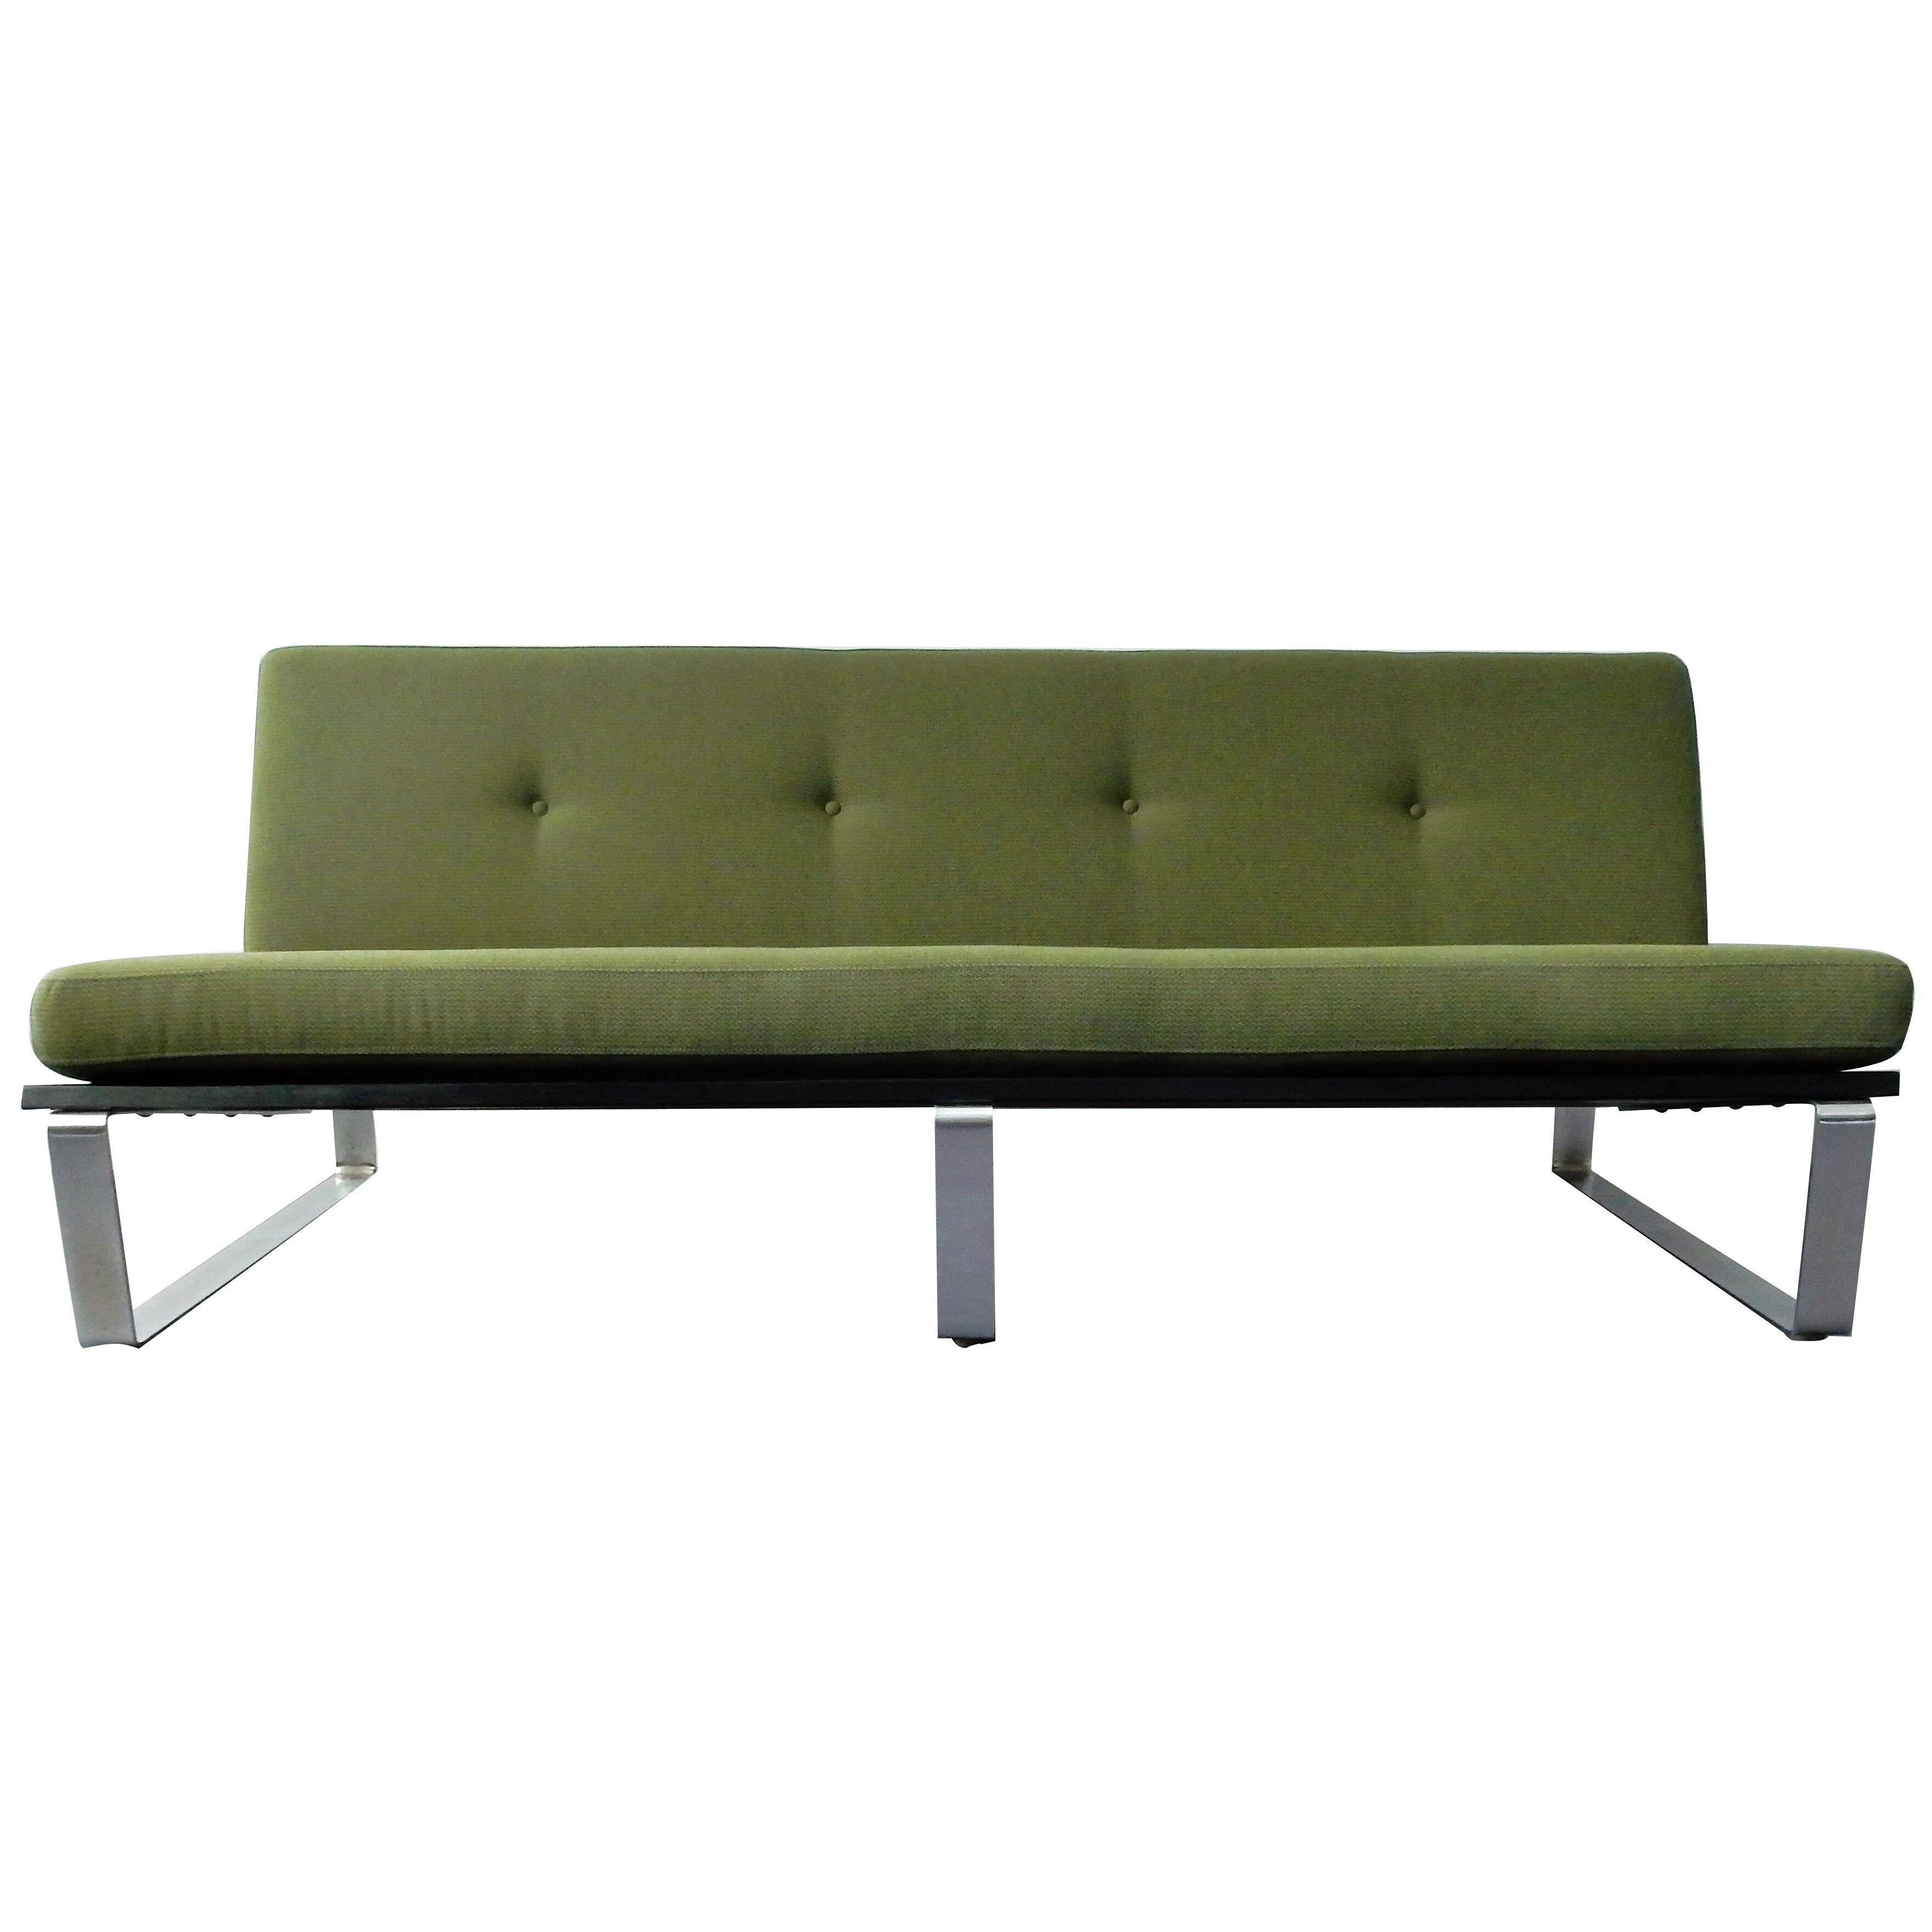 2,5-seater sofa by Kho Liang Ie for Artifort, 1962, with new De Ploeg fabric.